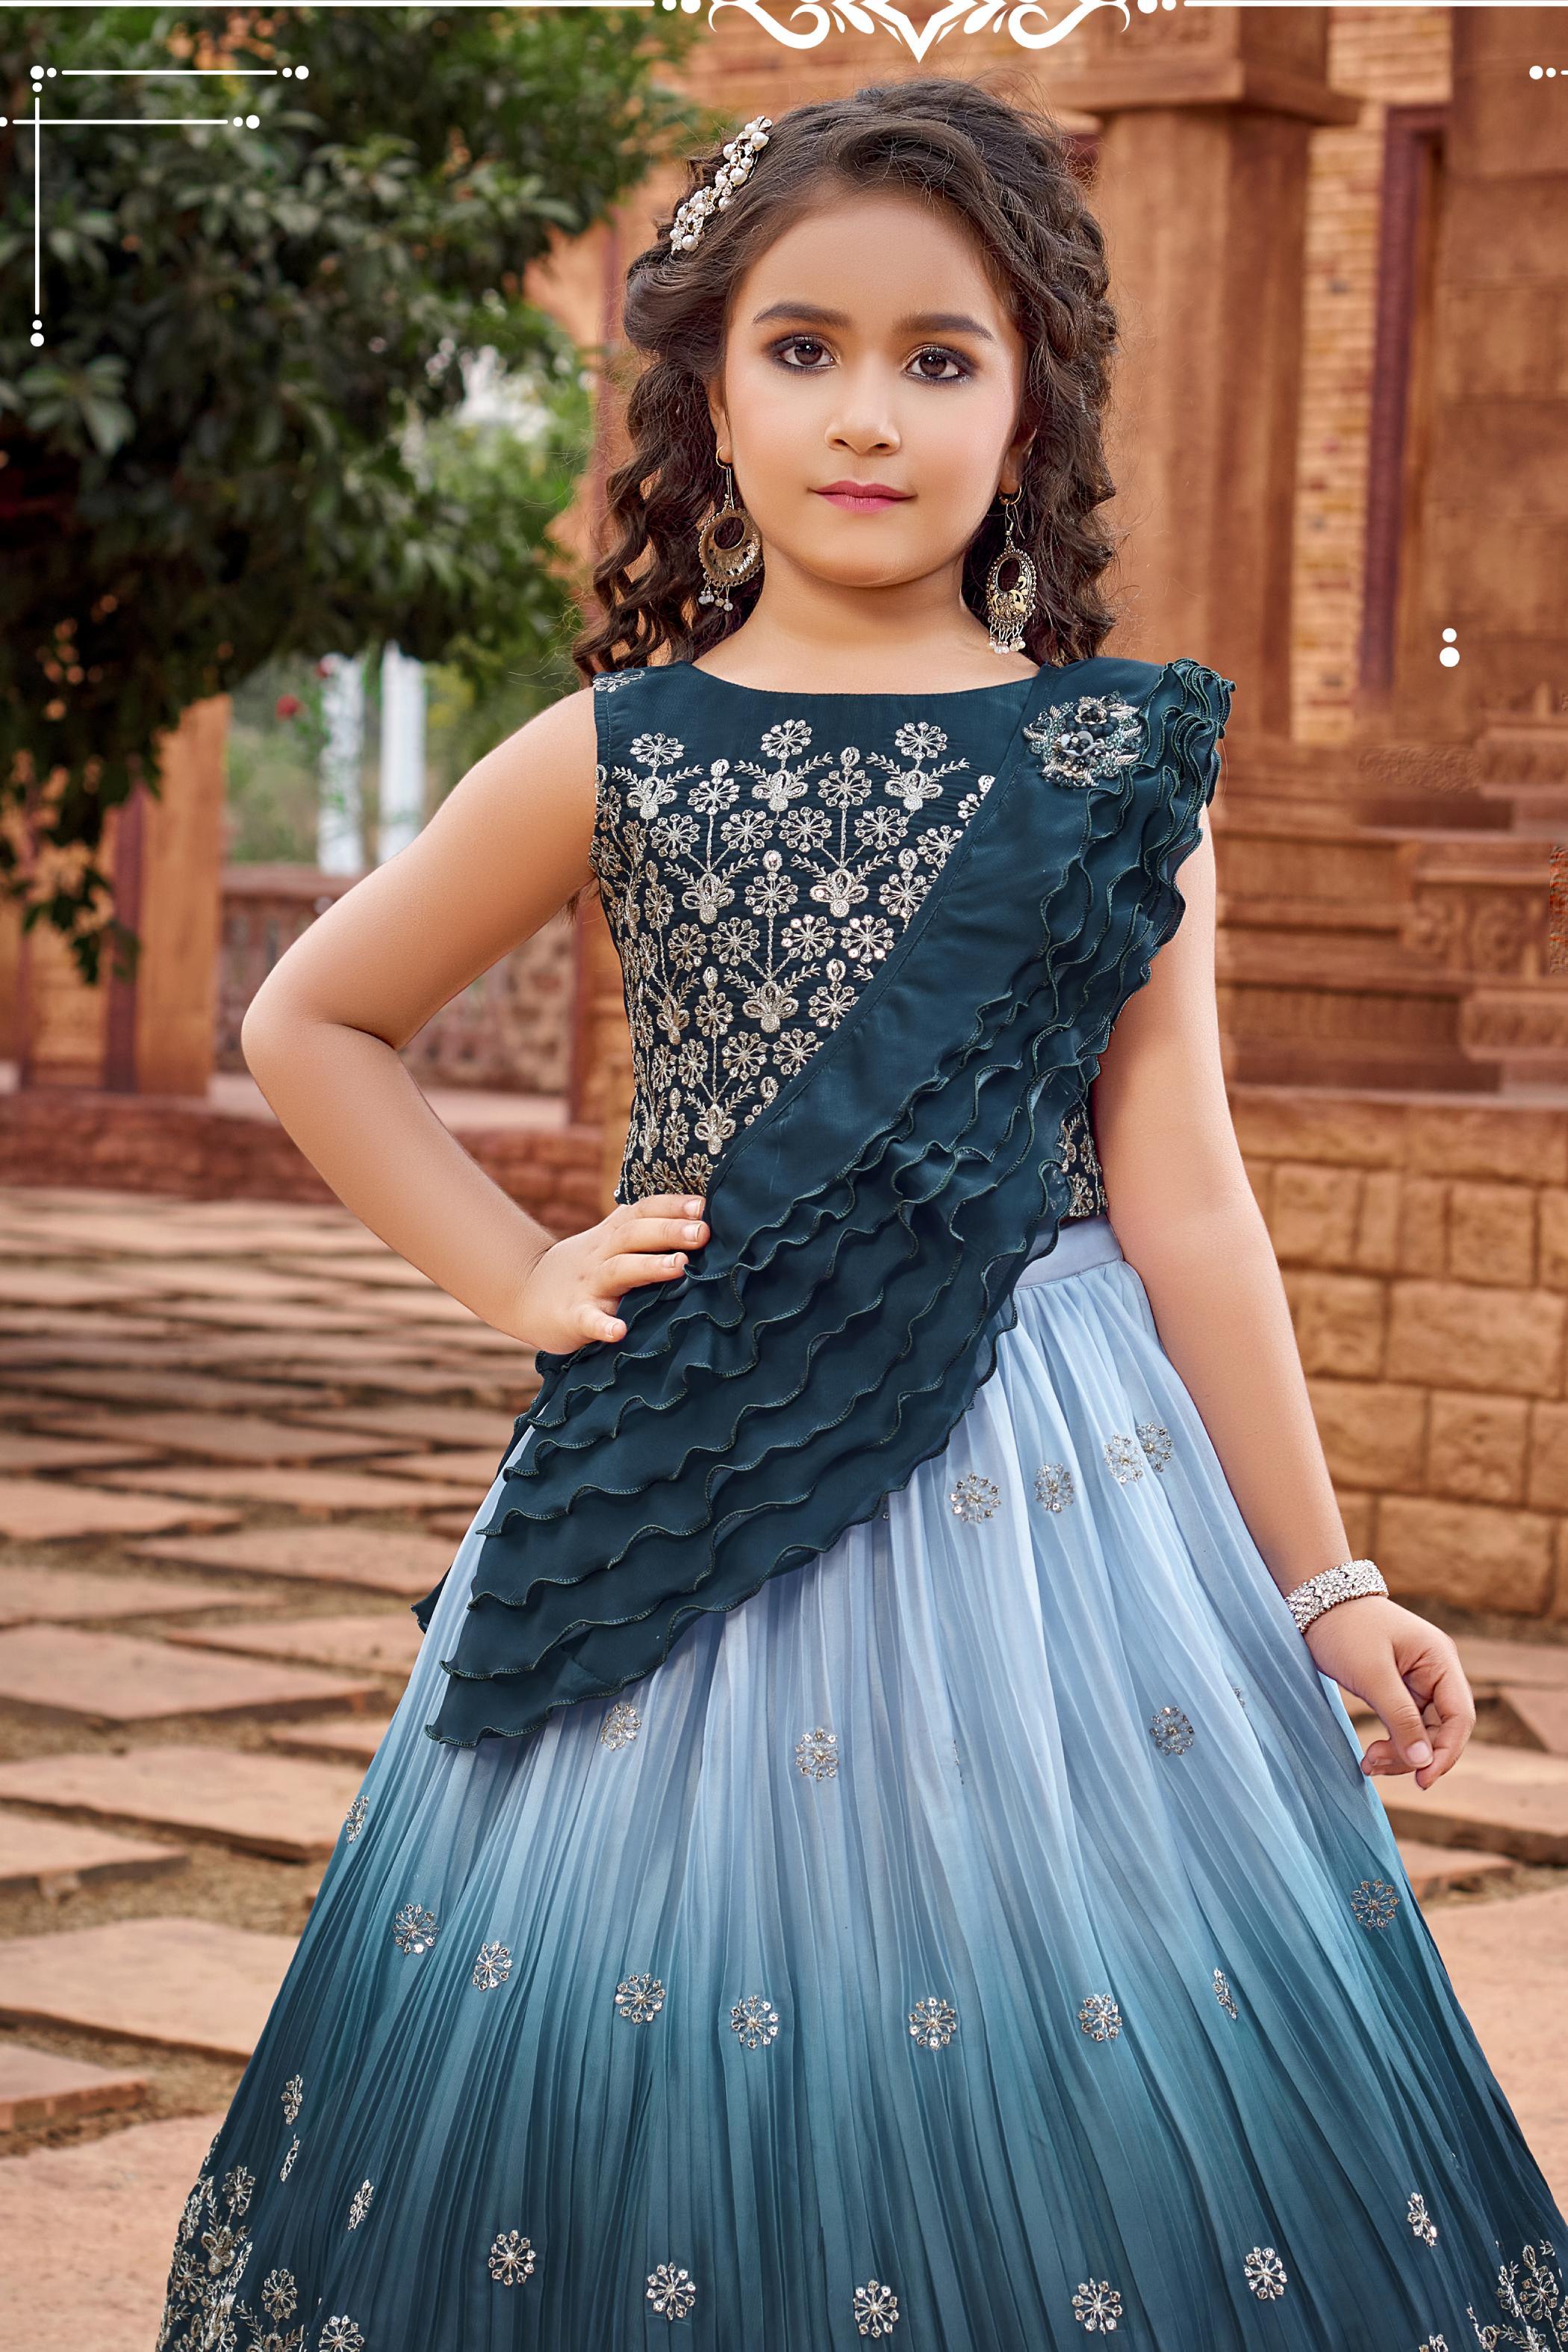 Geogratte Party Wear Kids Lehenga In Light Pink WIth Embrodiery Work - Lehenga  Girls - Kids